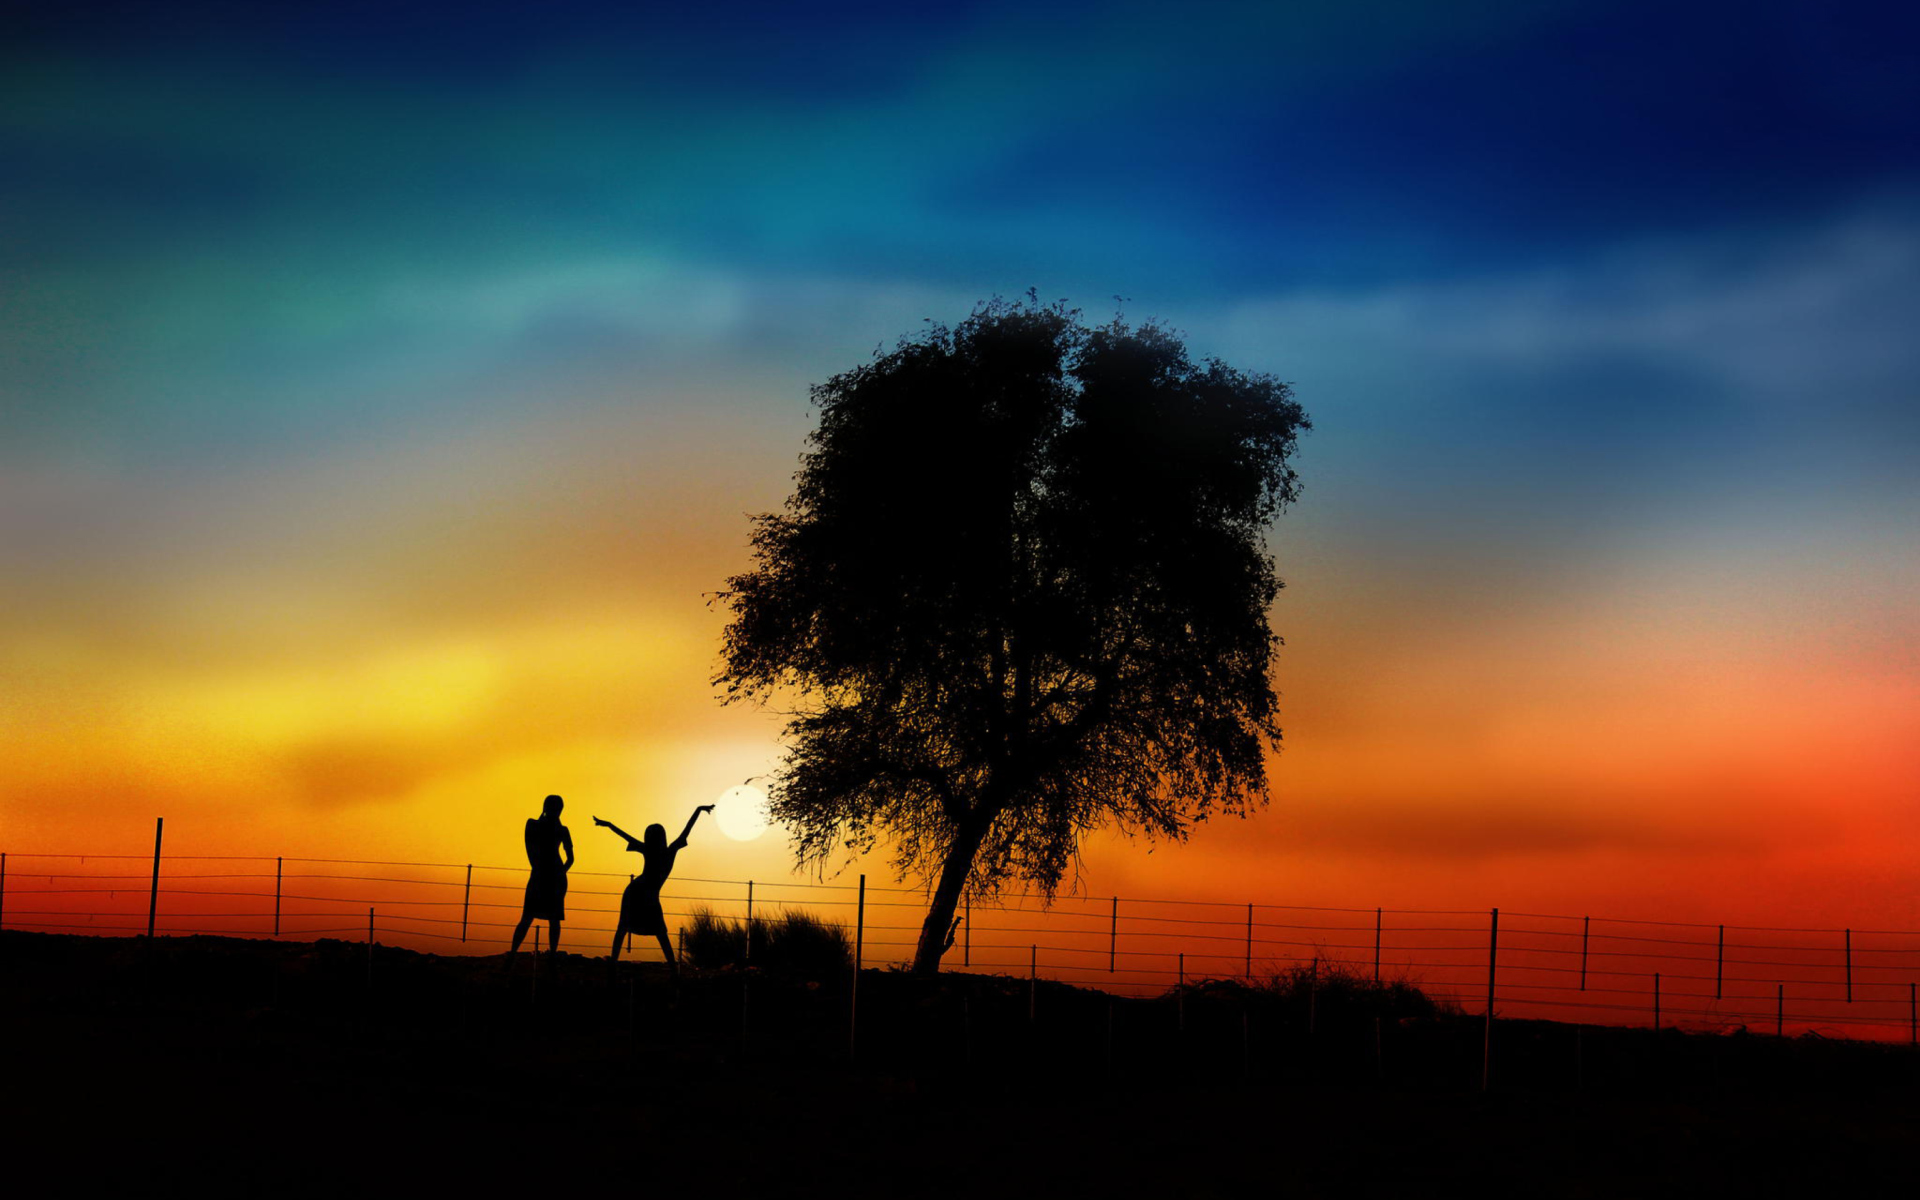 Couple Silhouettes Under Tree At Sunset wallpaper 1920x1200